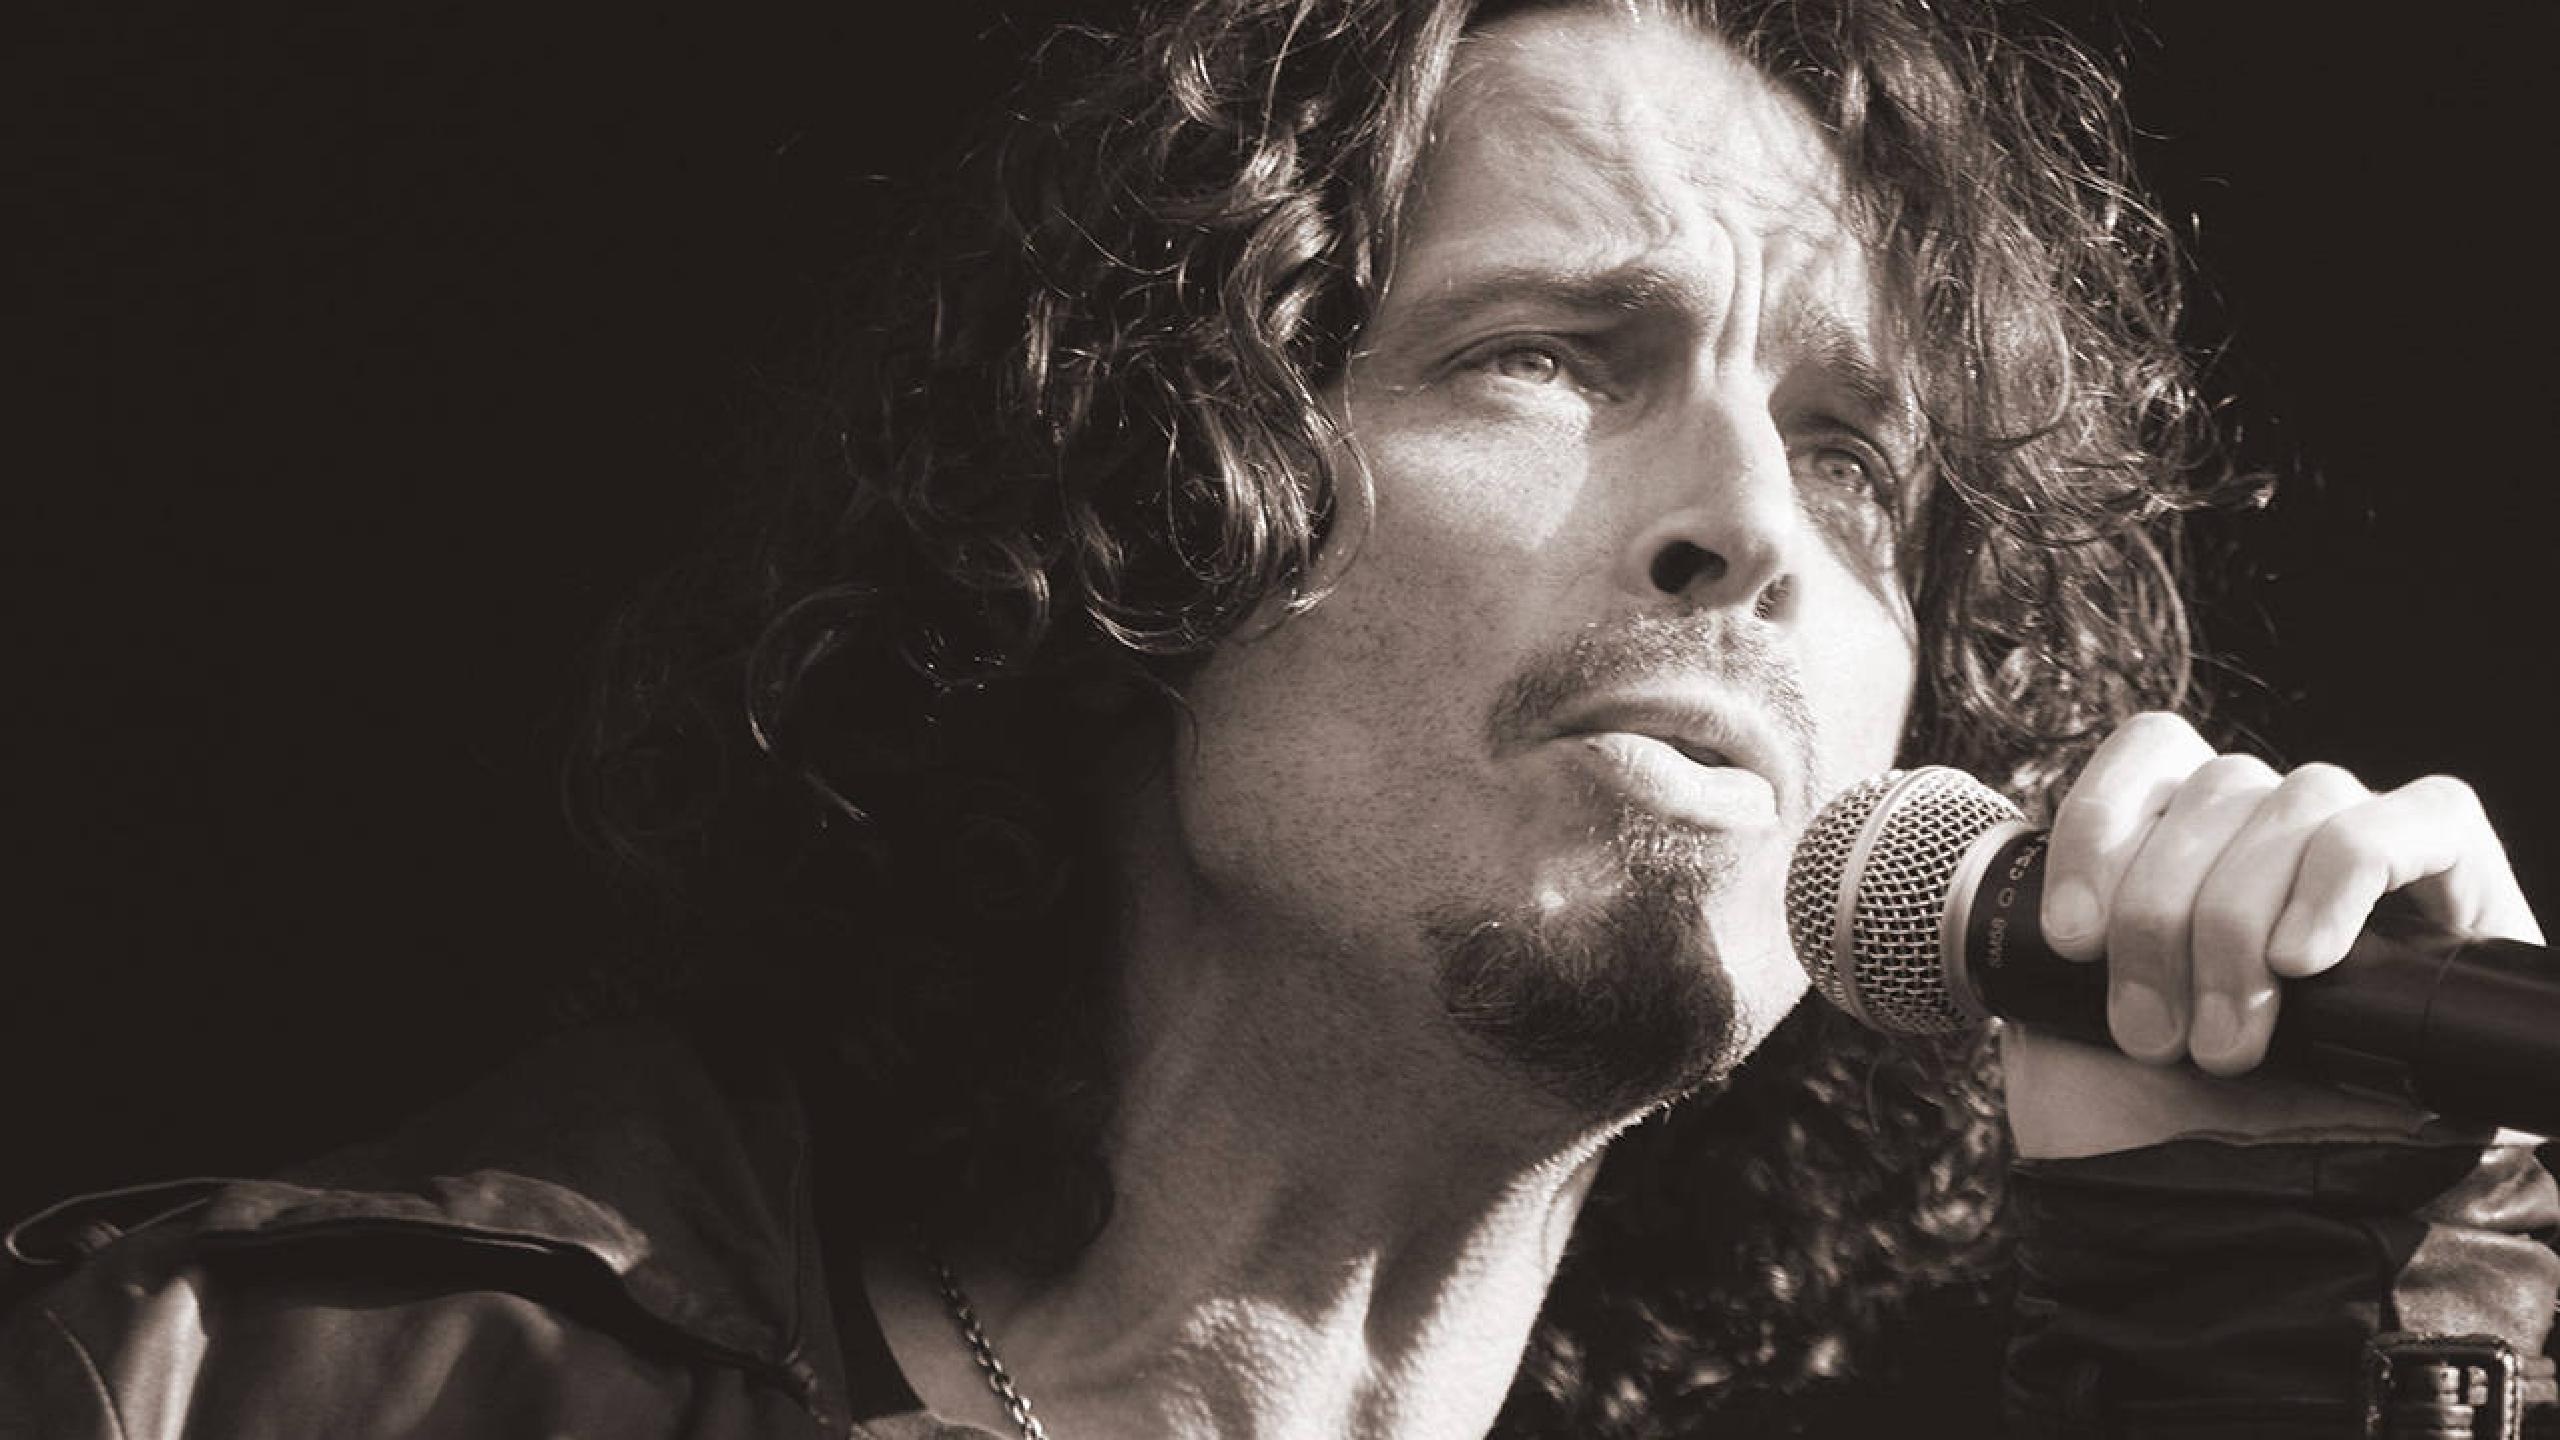 Chris Cornell Wallpapers - Top Free Chris Cornell Backgrounds 2560x1440